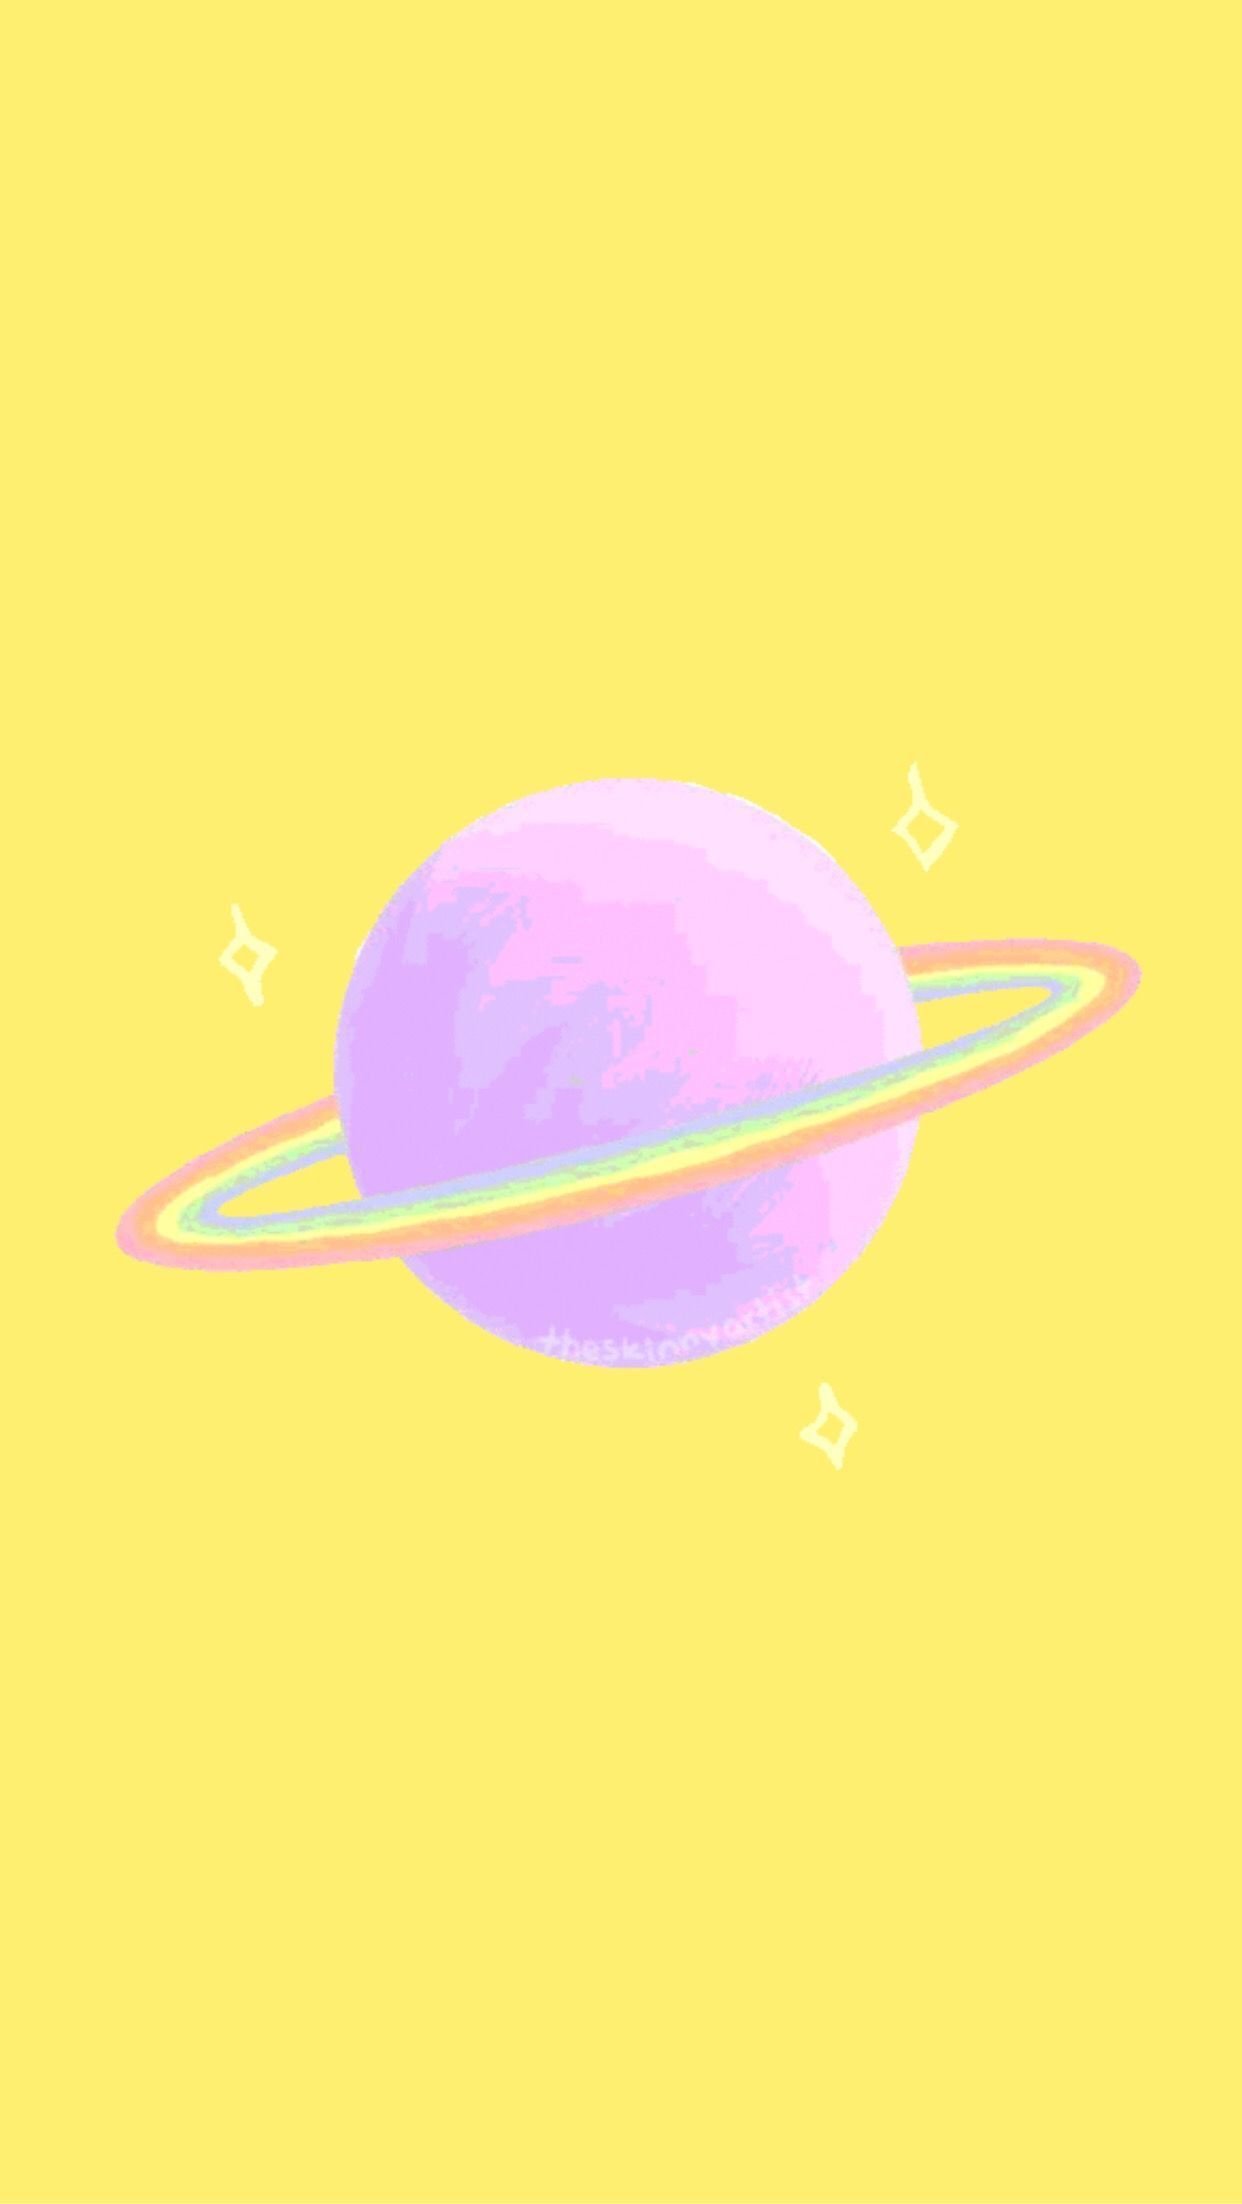 Yellow Lockscreen / Wallpaper / Background Space Saturn Pink Color Planet Aesthetic #wfaves Yellow Lo. Planets wallpaper, Wallpaper space, Wallpaper background